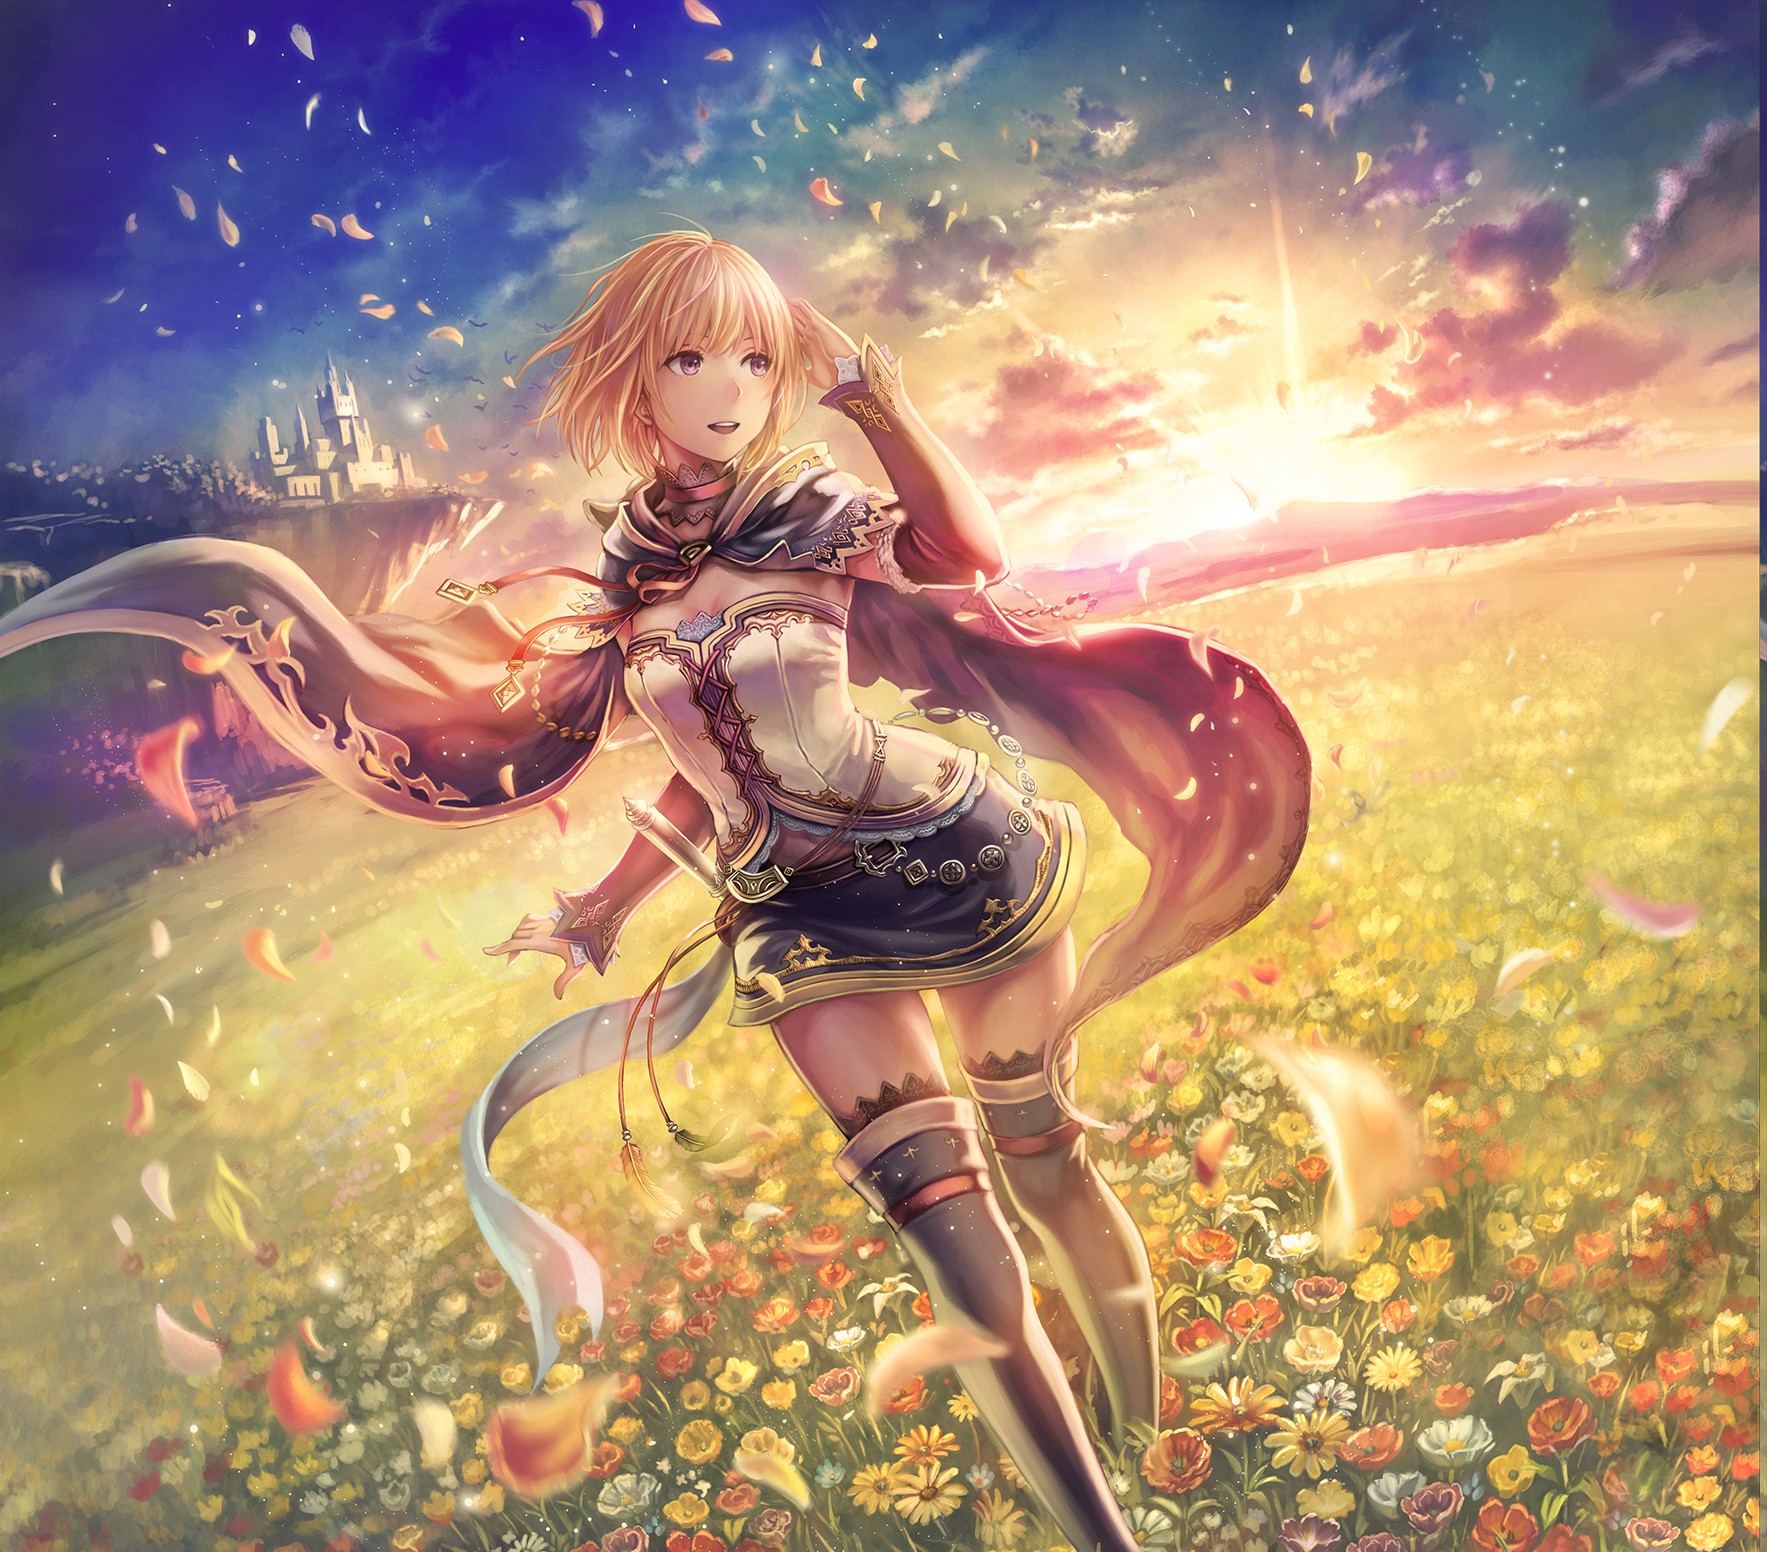 flowers, Anime Girls, Leaves, Sunset, Castle, Thigh highs, Original Characters Wallpaper